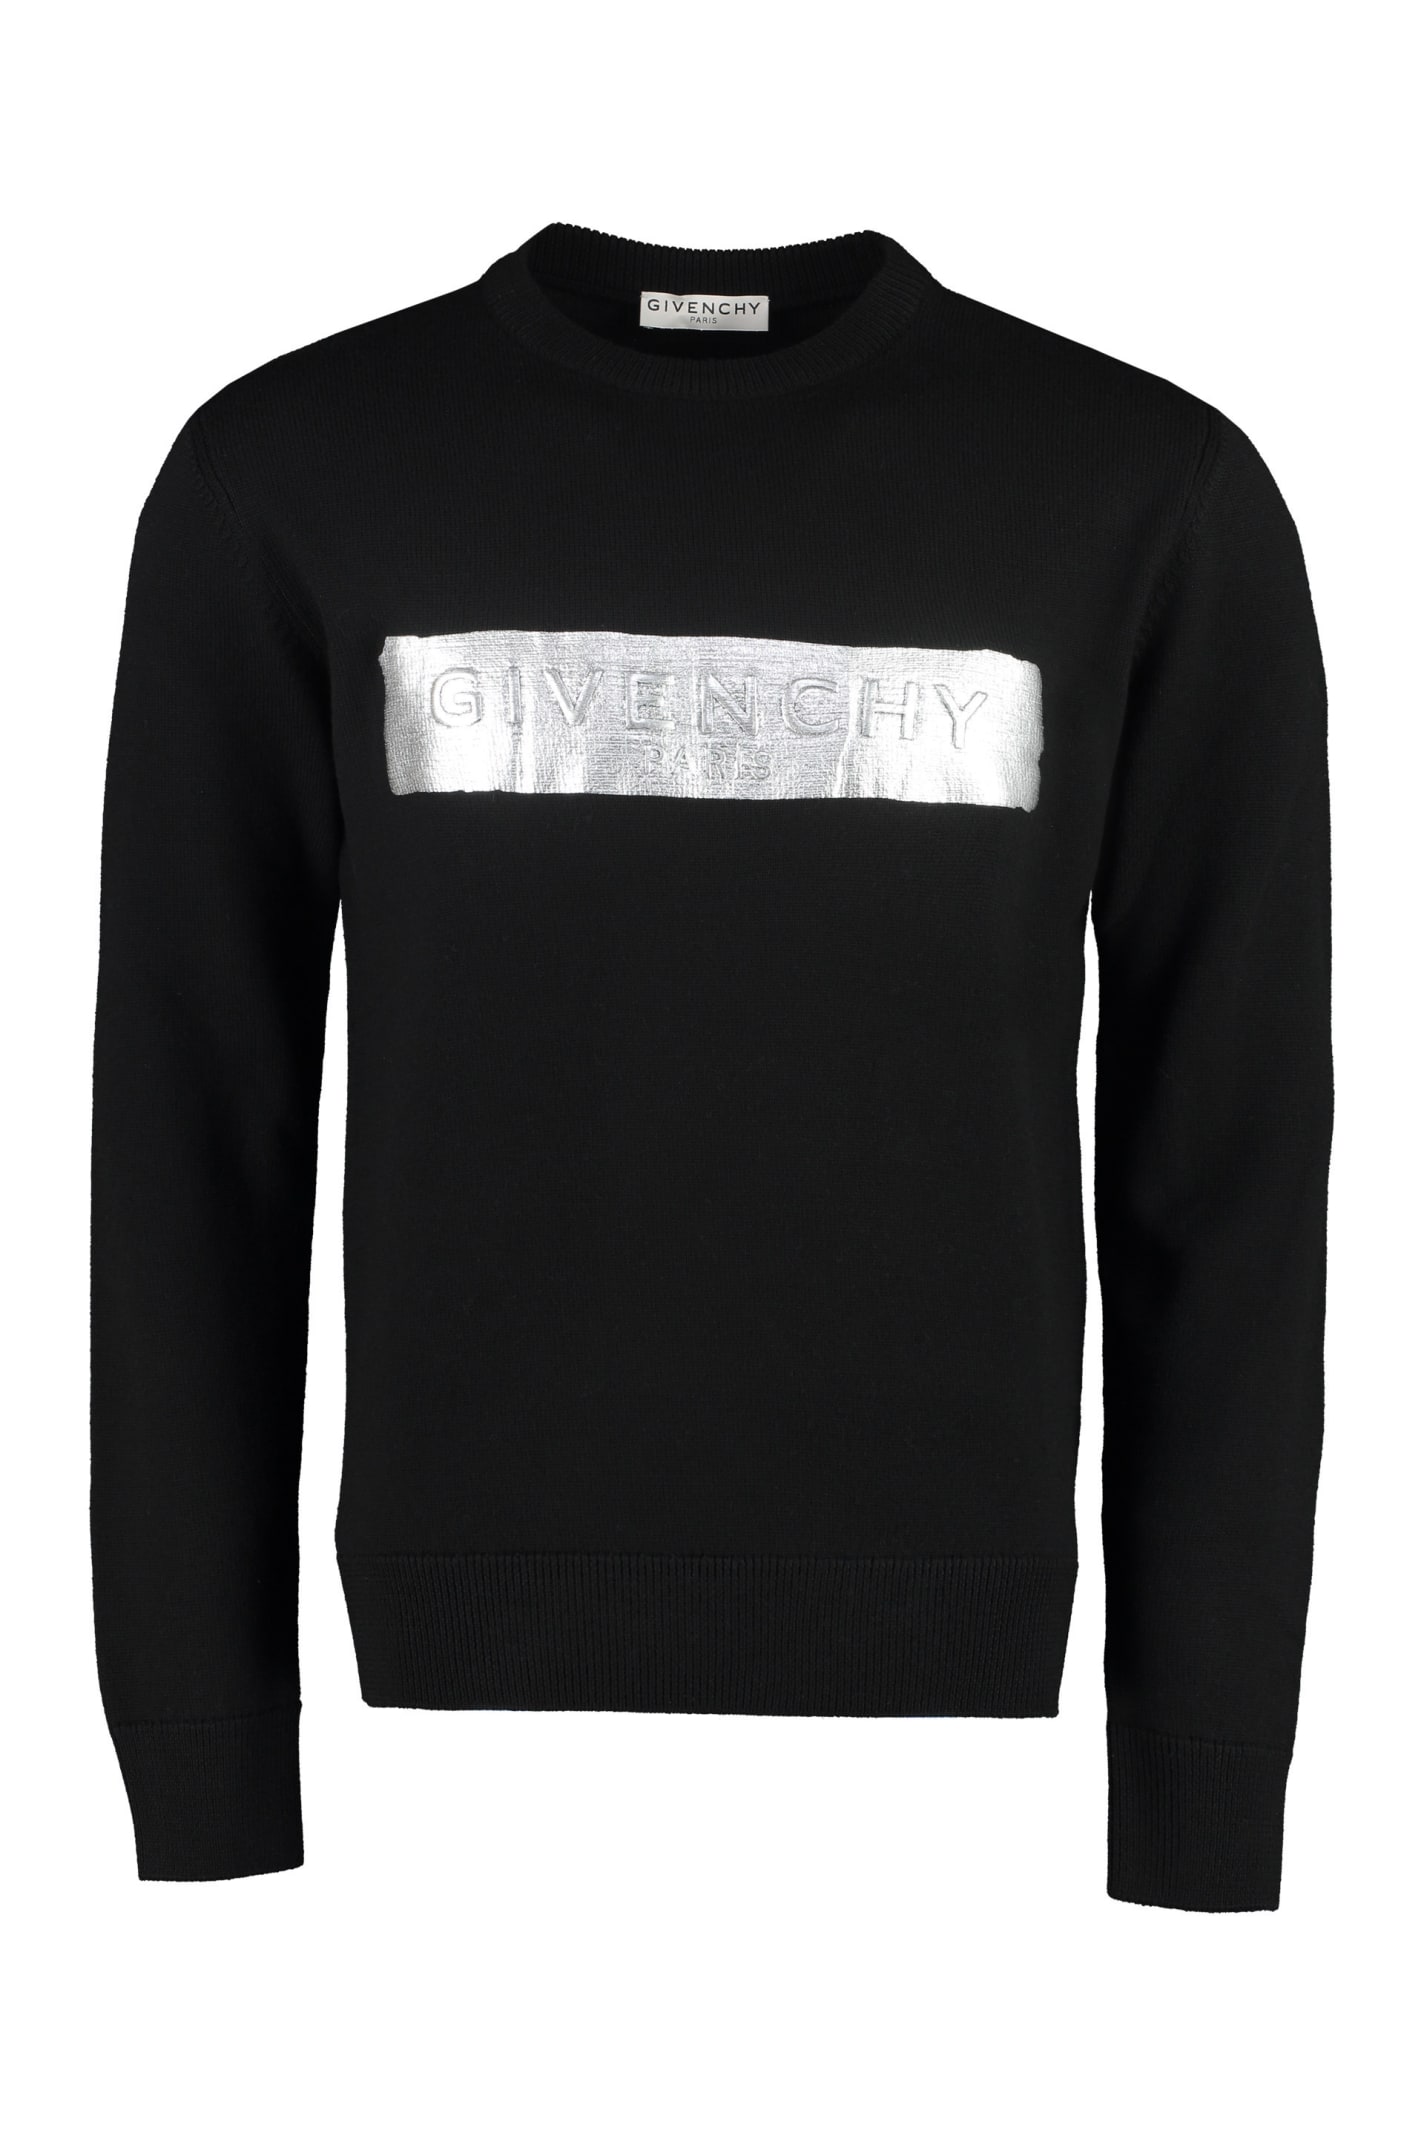 Givenchy Wool Pullover